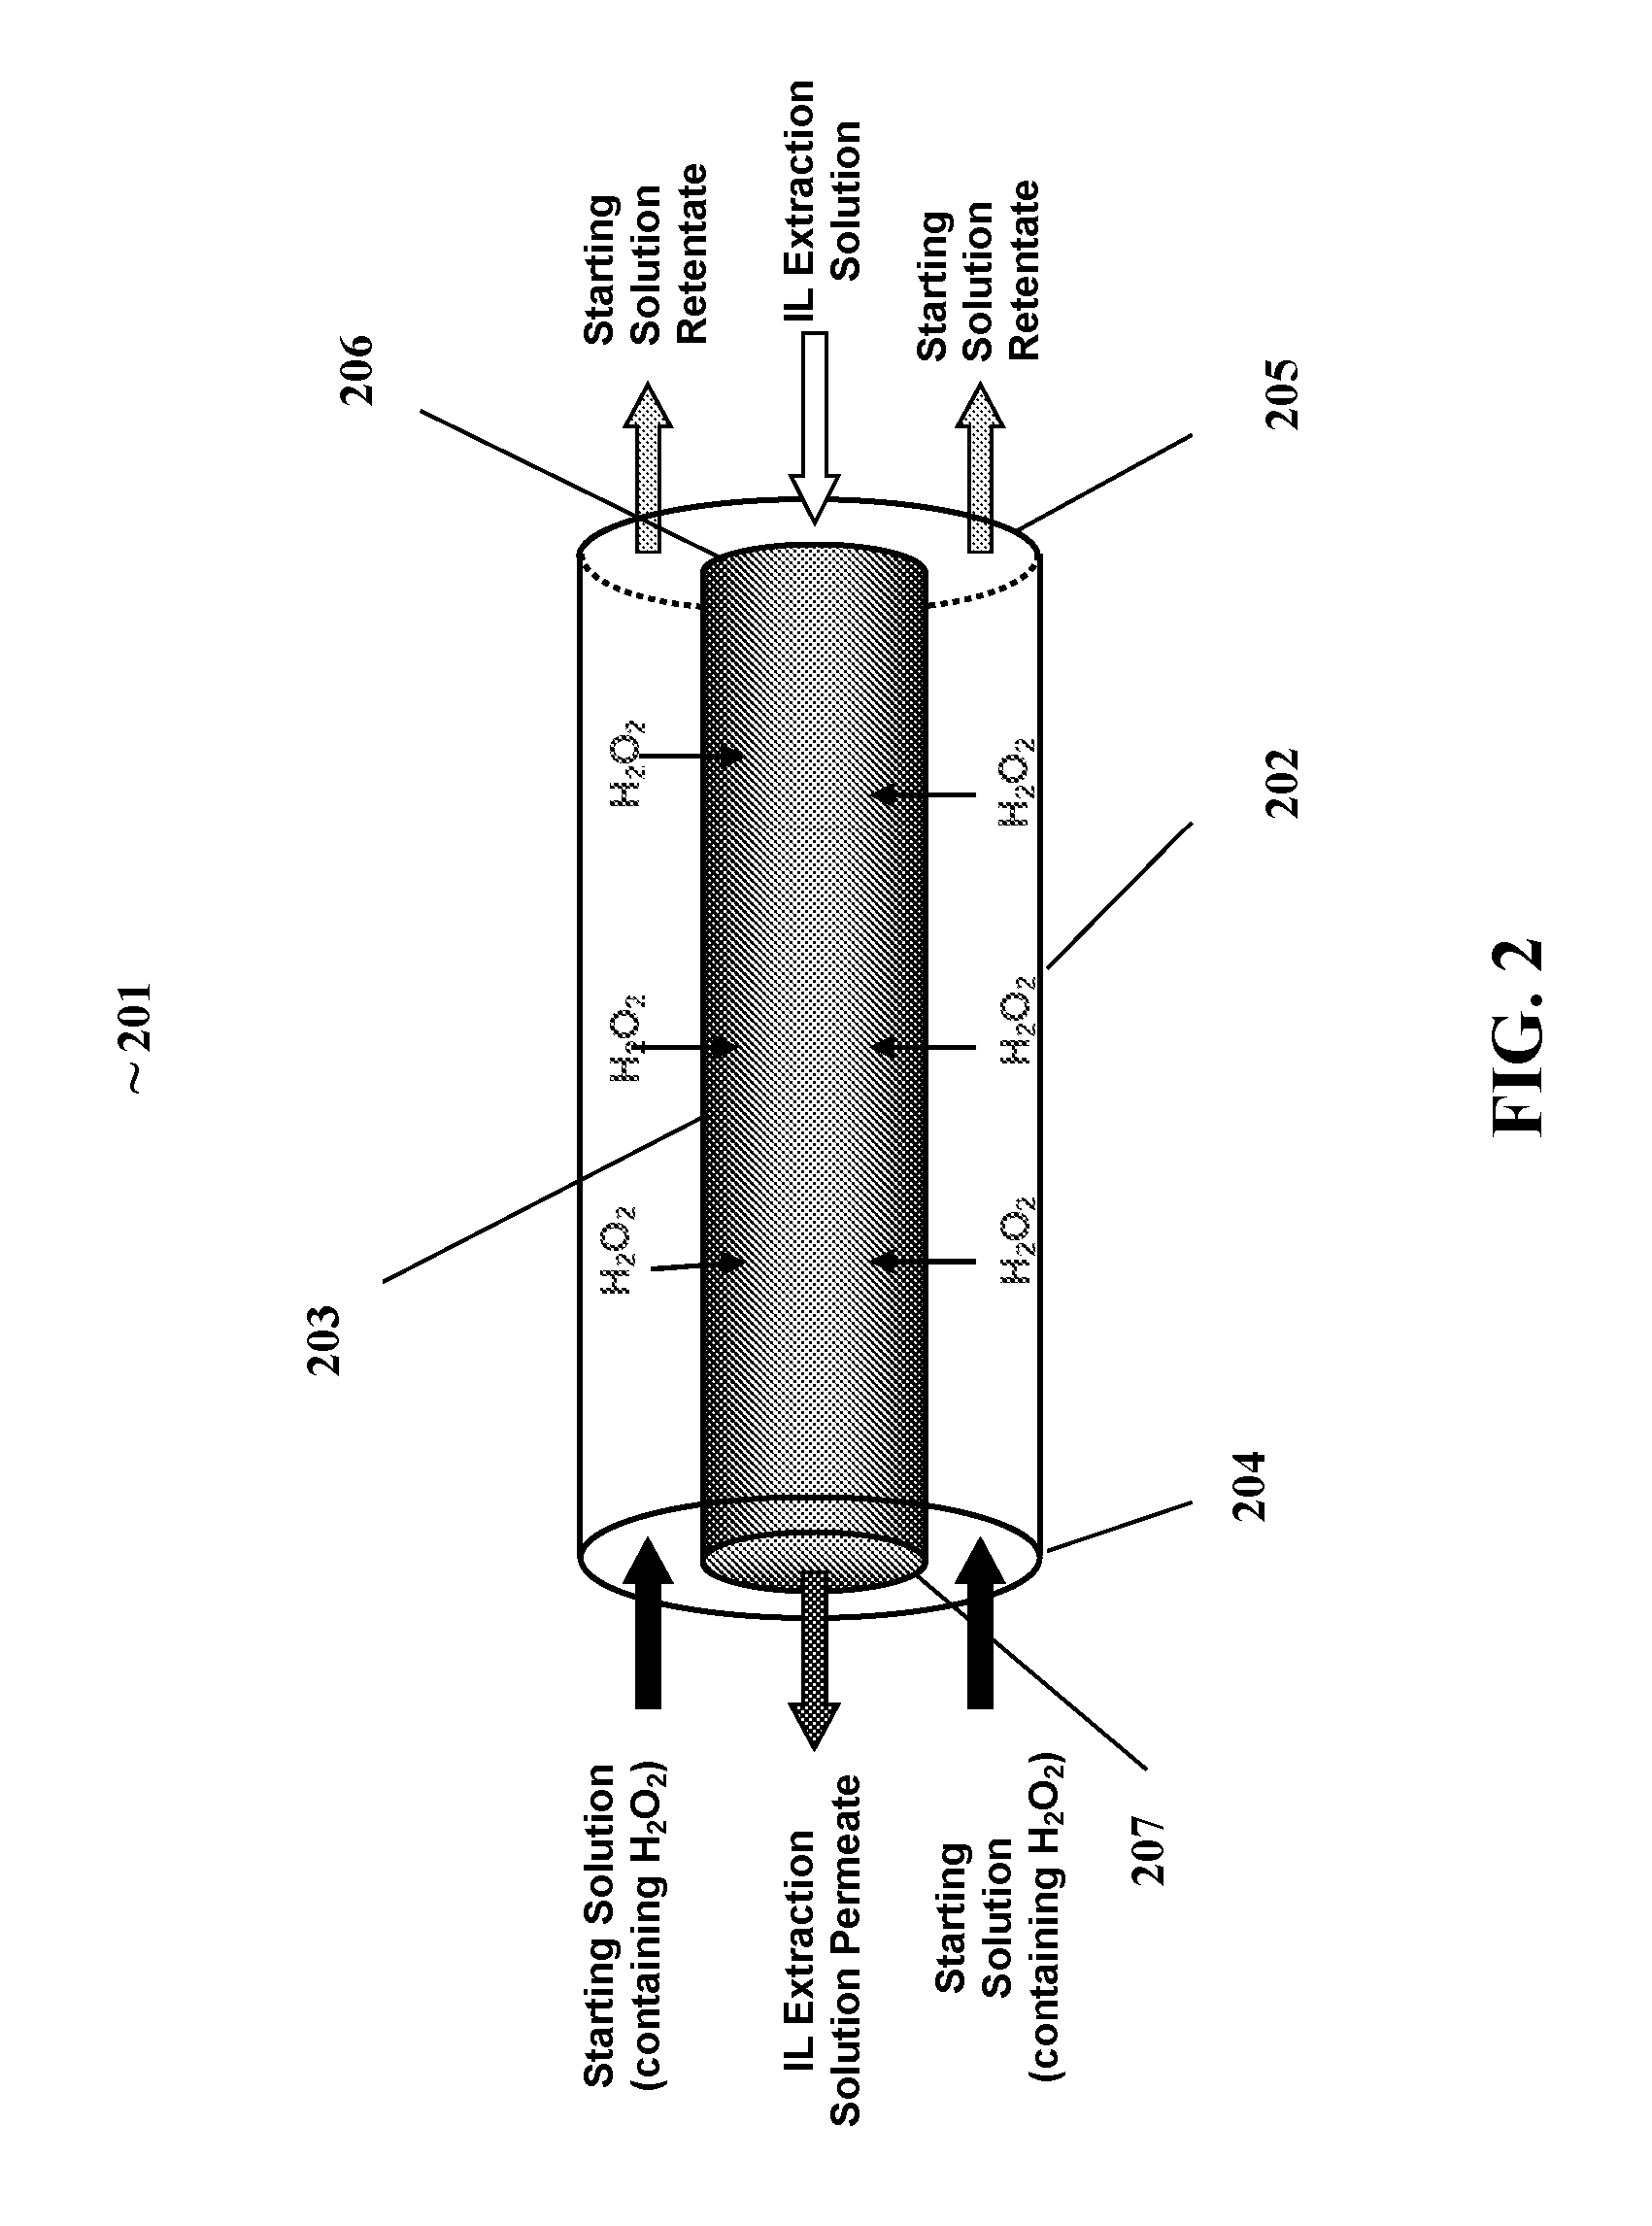 Membrane contactor assisted extraction/reaction process employing ionic liquids